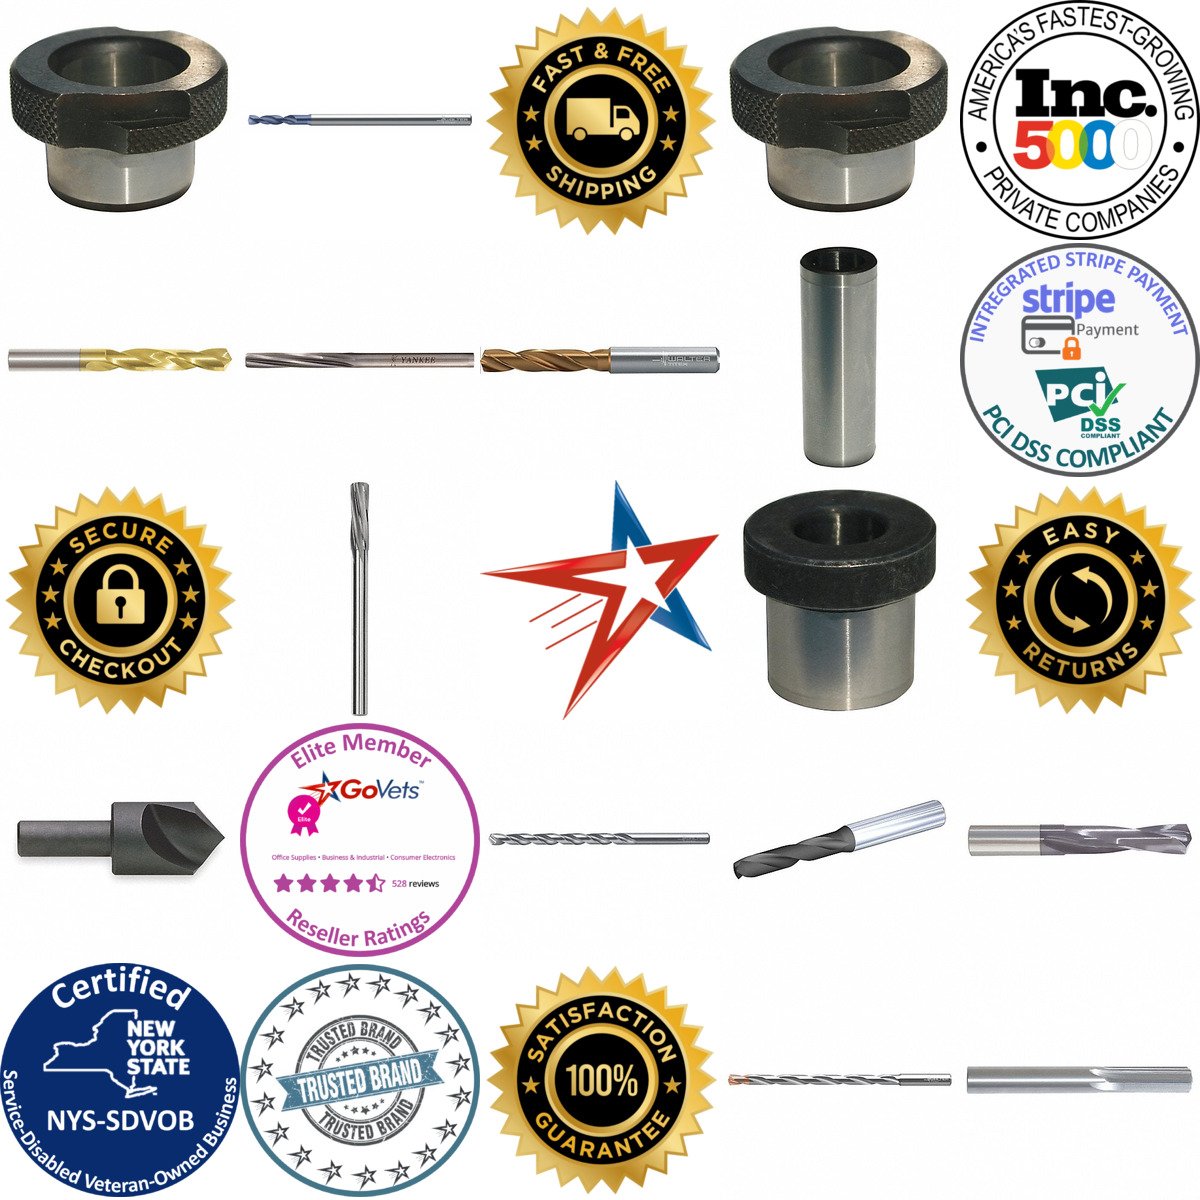 A selection of Drilling and Holemaking products on GoVets